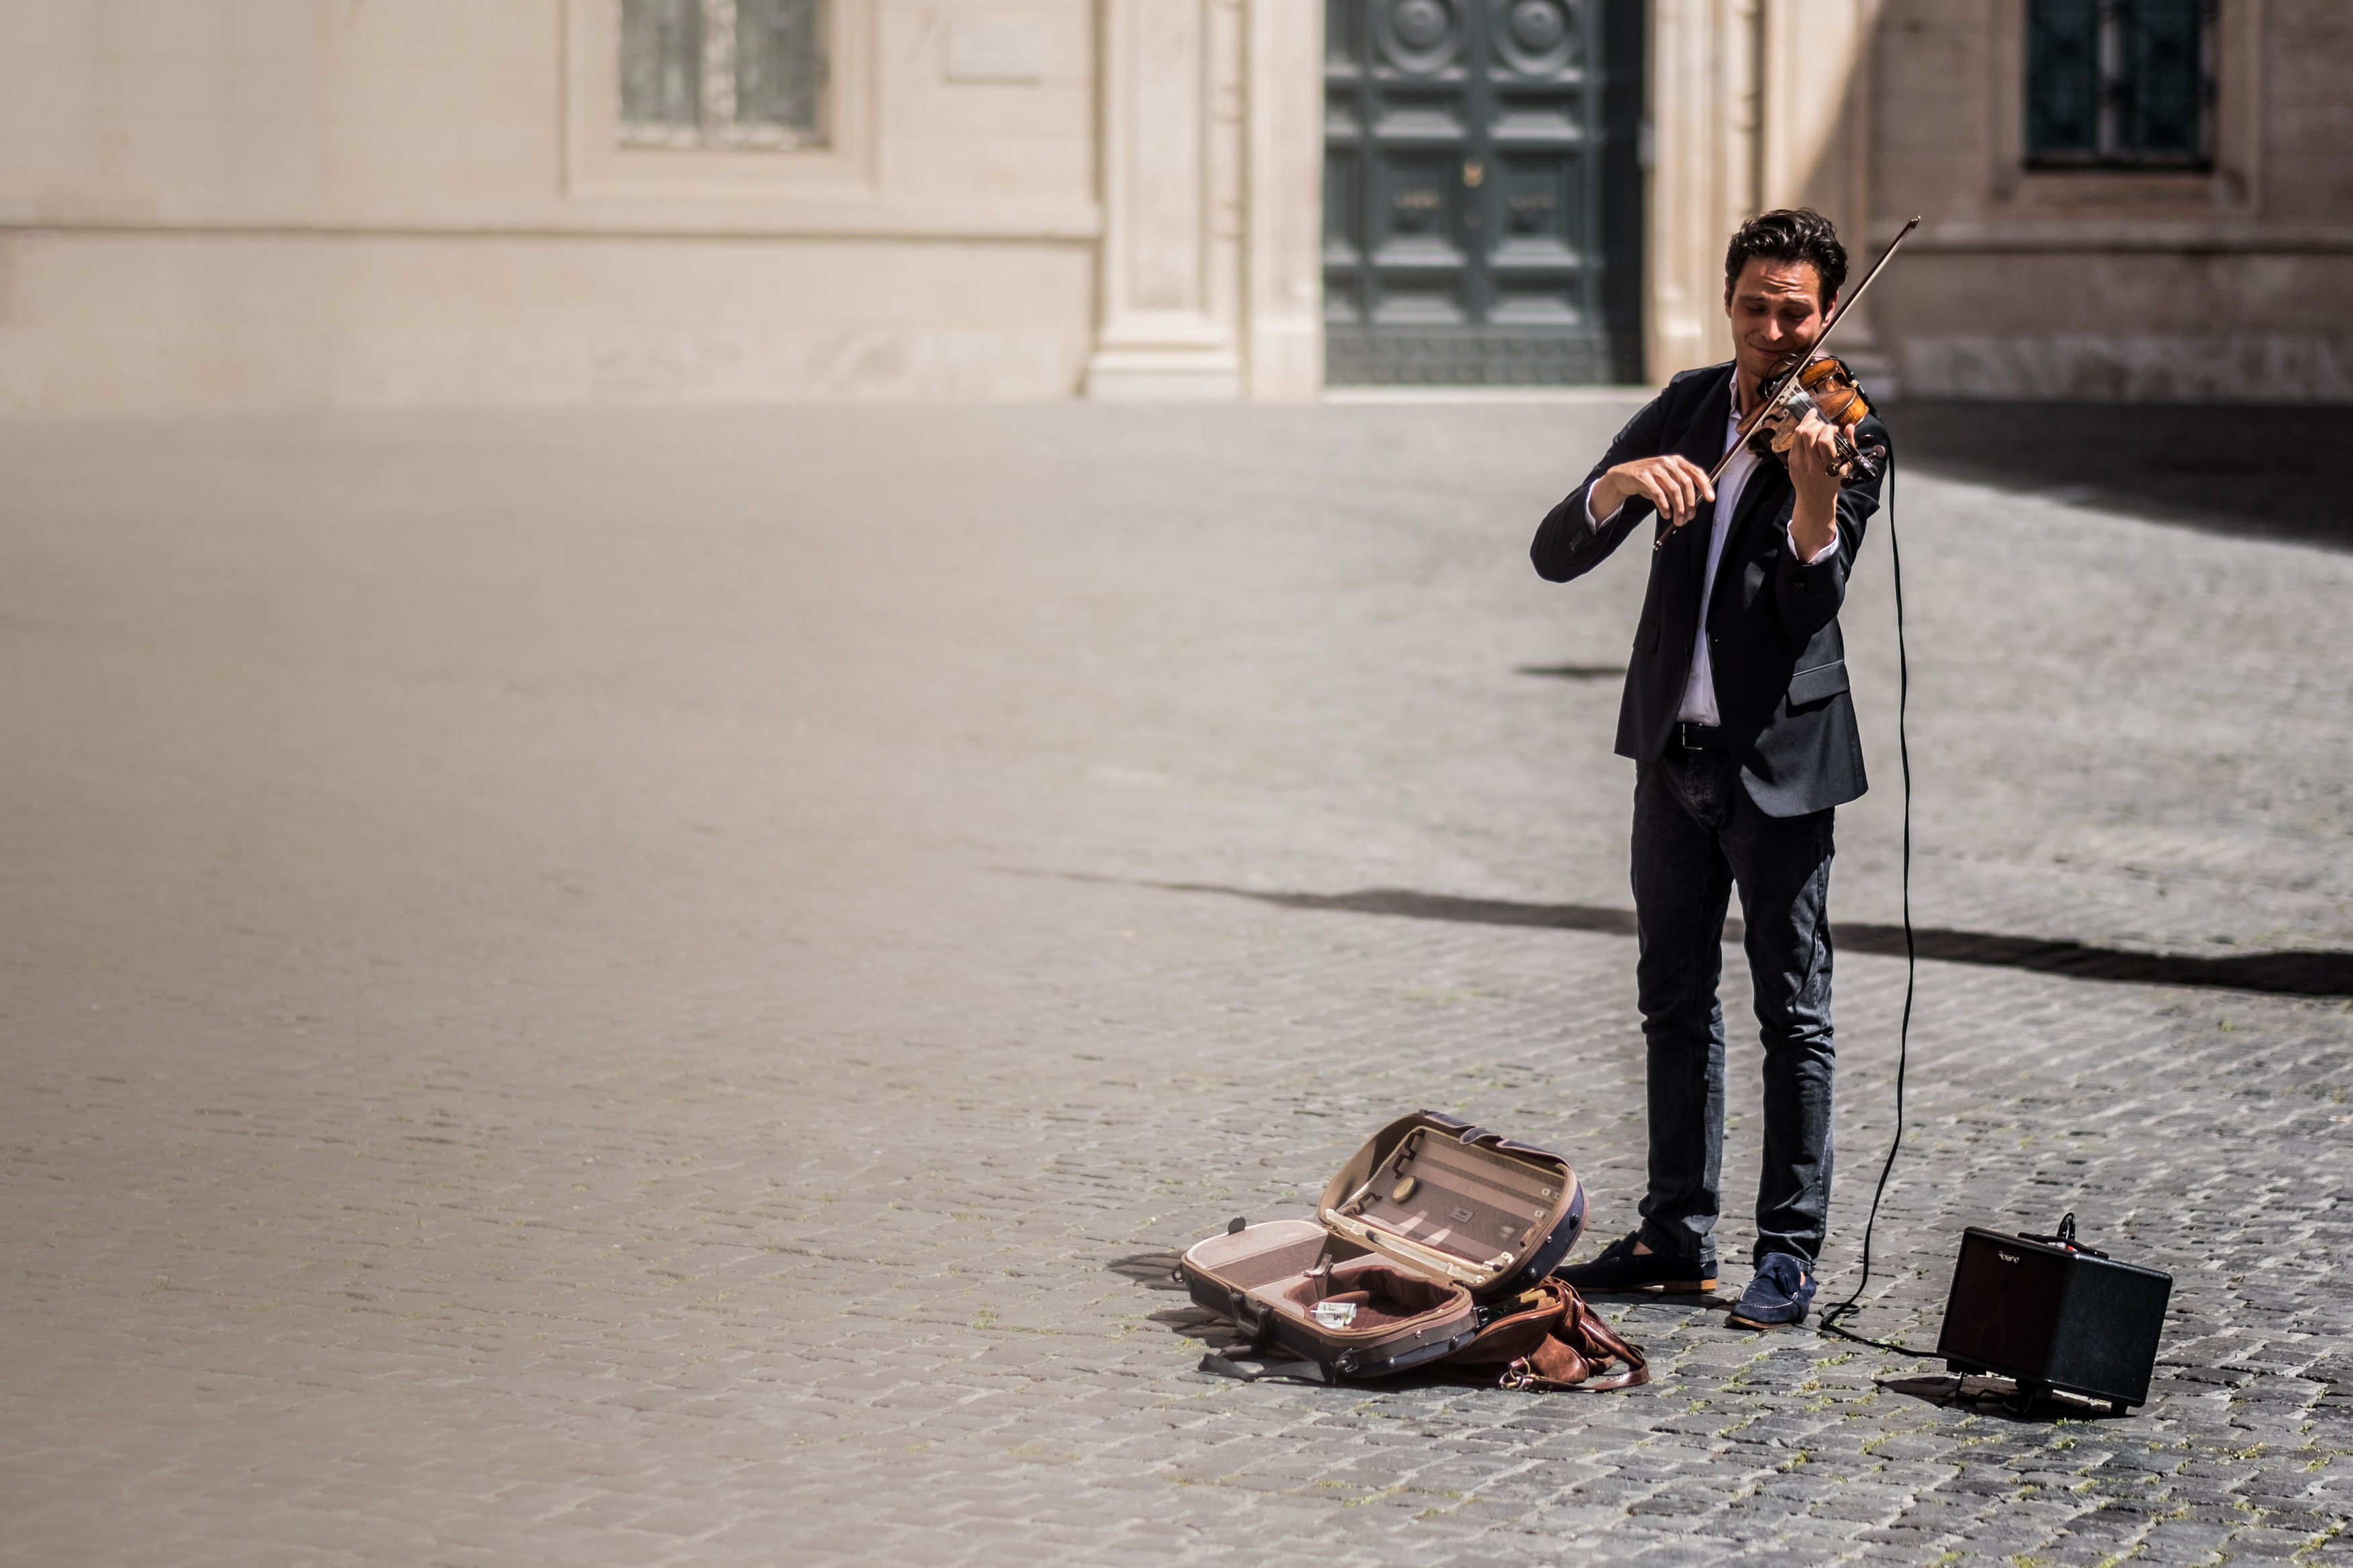 Photo of a violinist on a square in Rome.